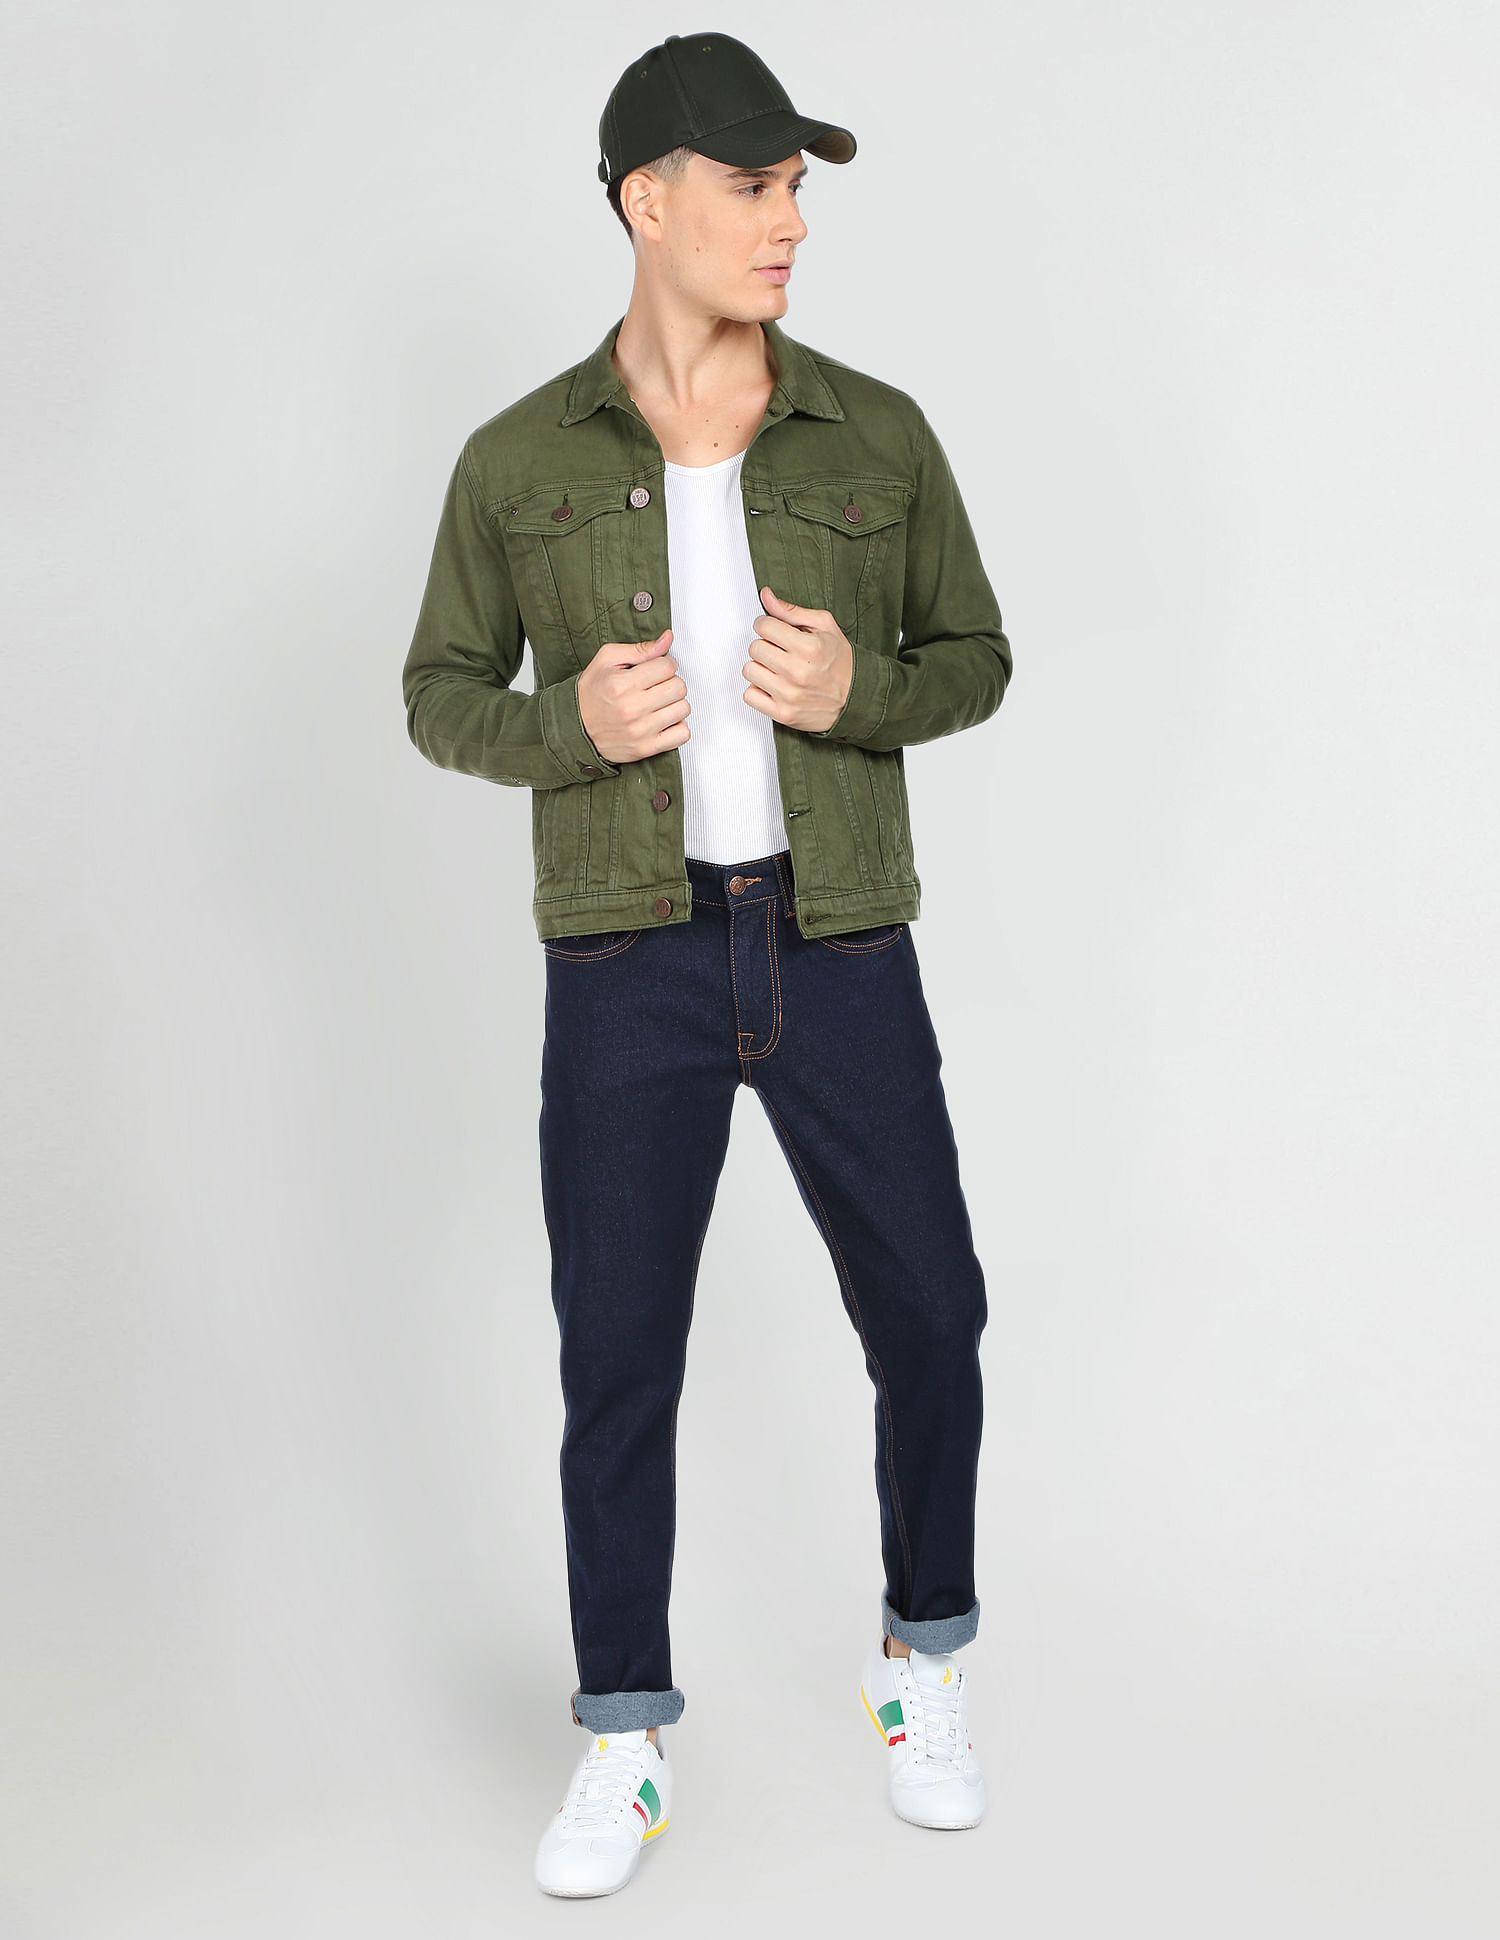 Spread collar Buttoned cuffs Jacket with 30 discount! | ONLY & SONS®